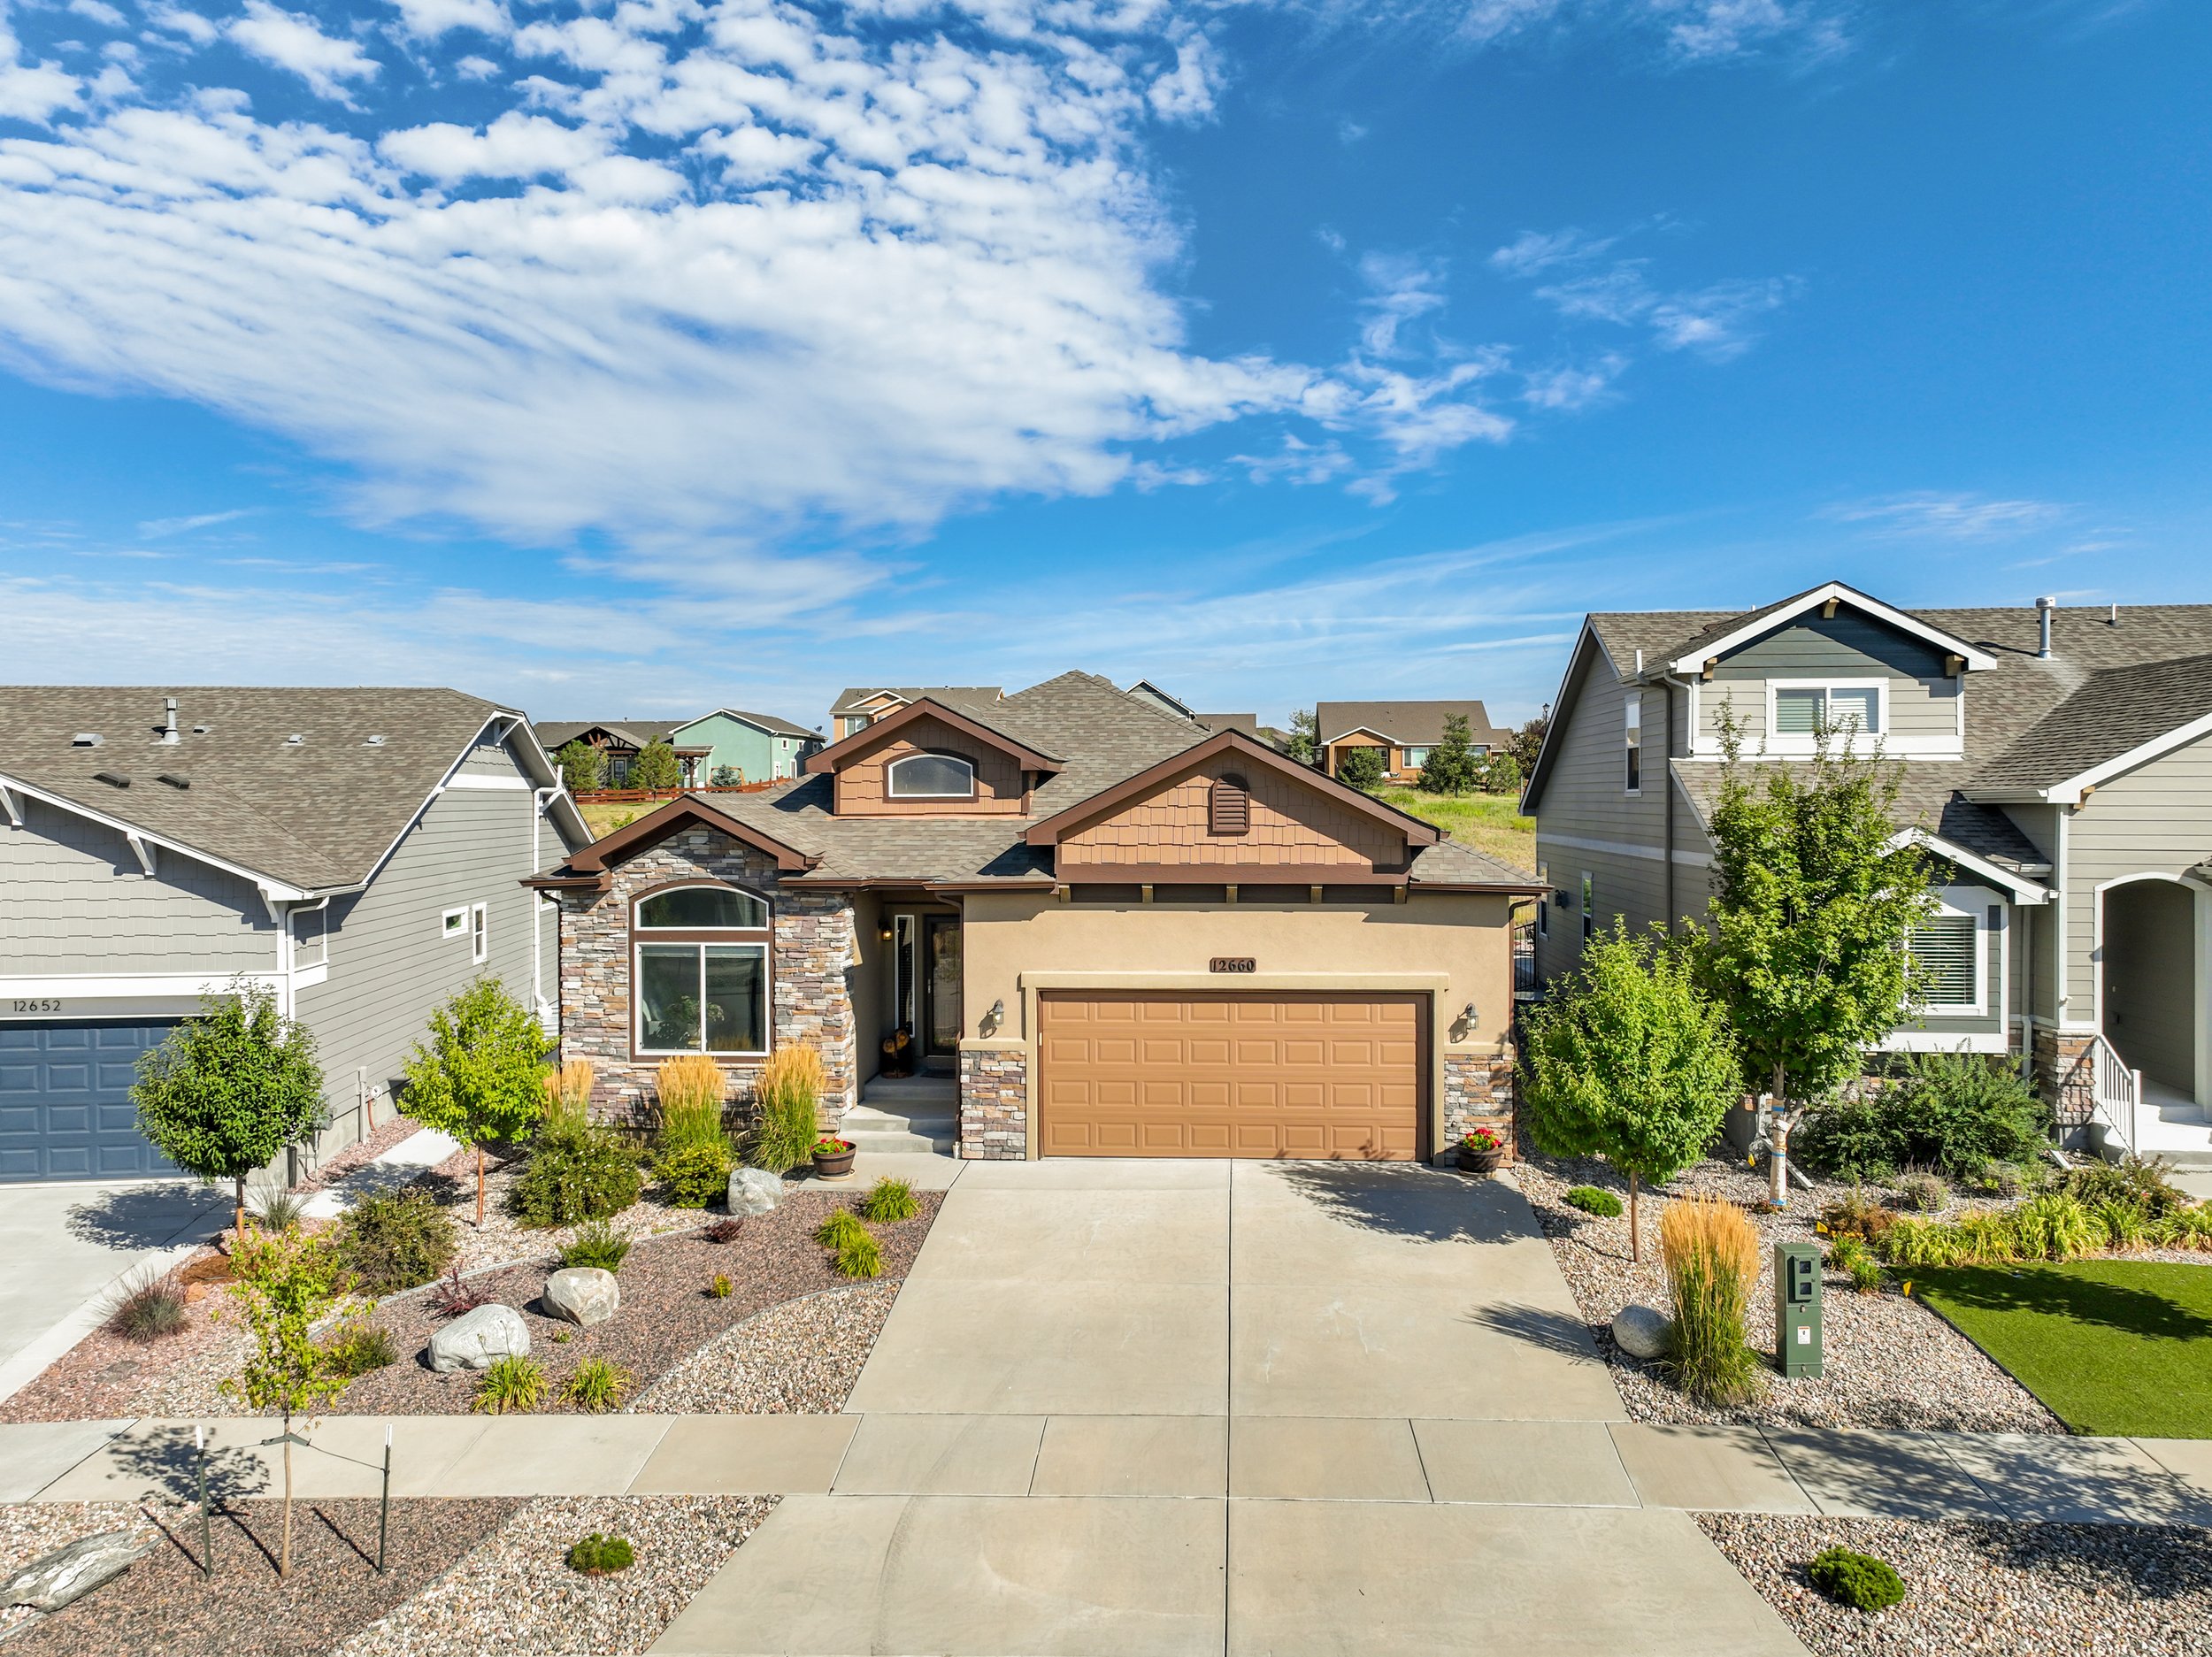 12260 Stone Valley Drive-6. Front of Homejpg.jpg